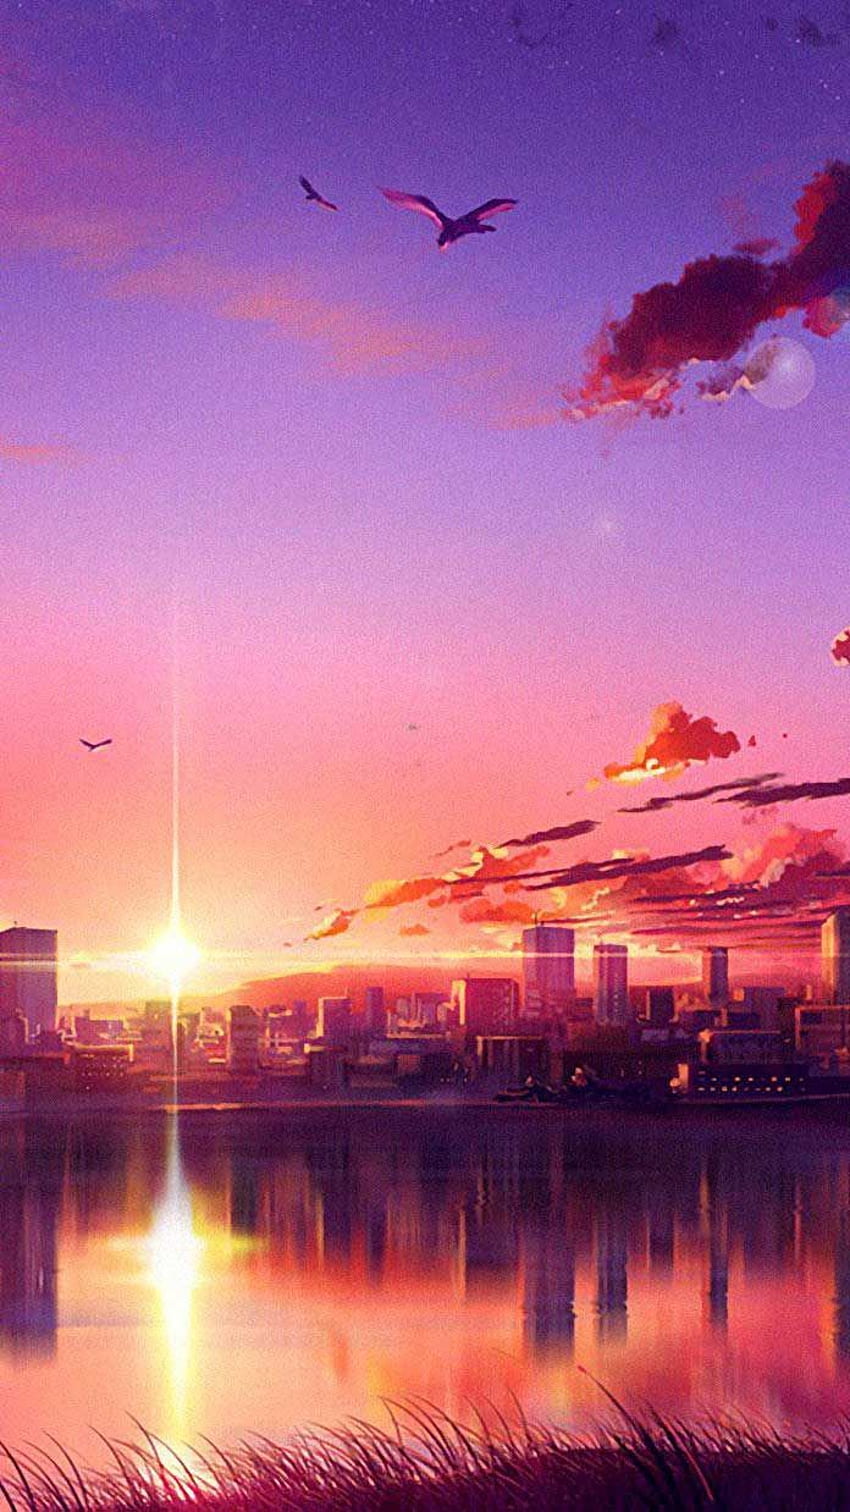 The sunset over a city and lake - Anime sunset